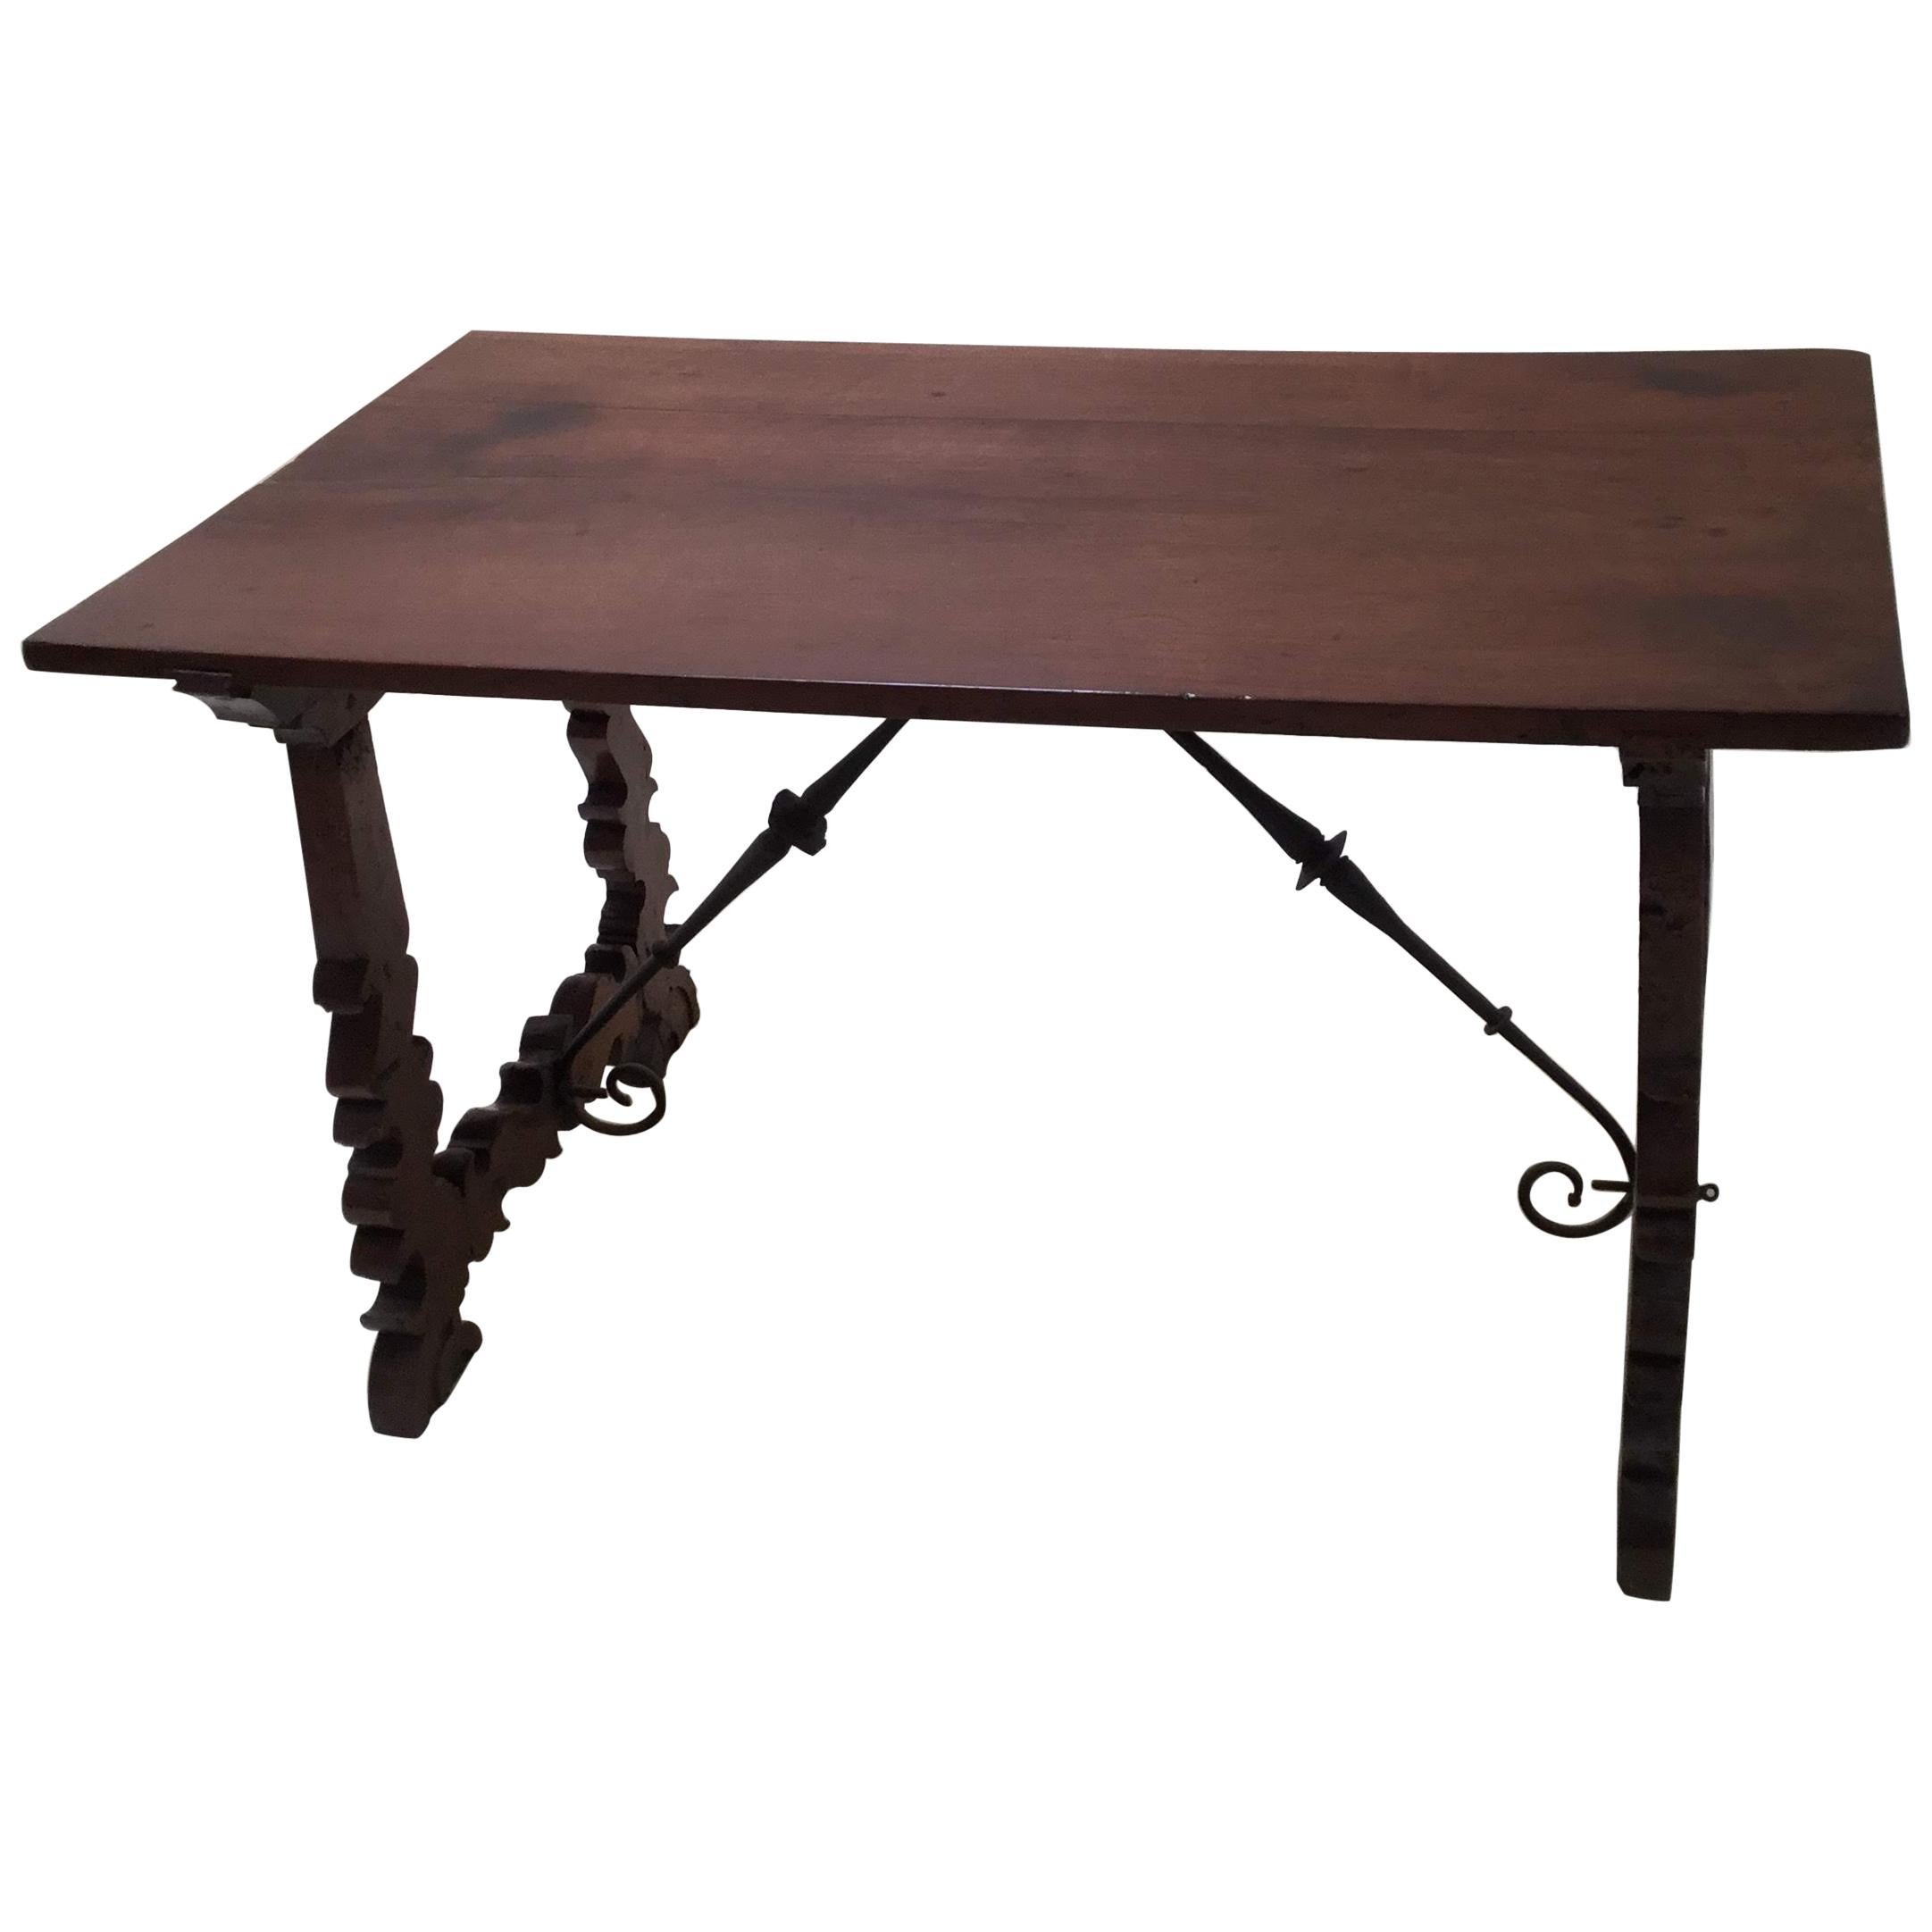 Spanish Writing Table For Sale